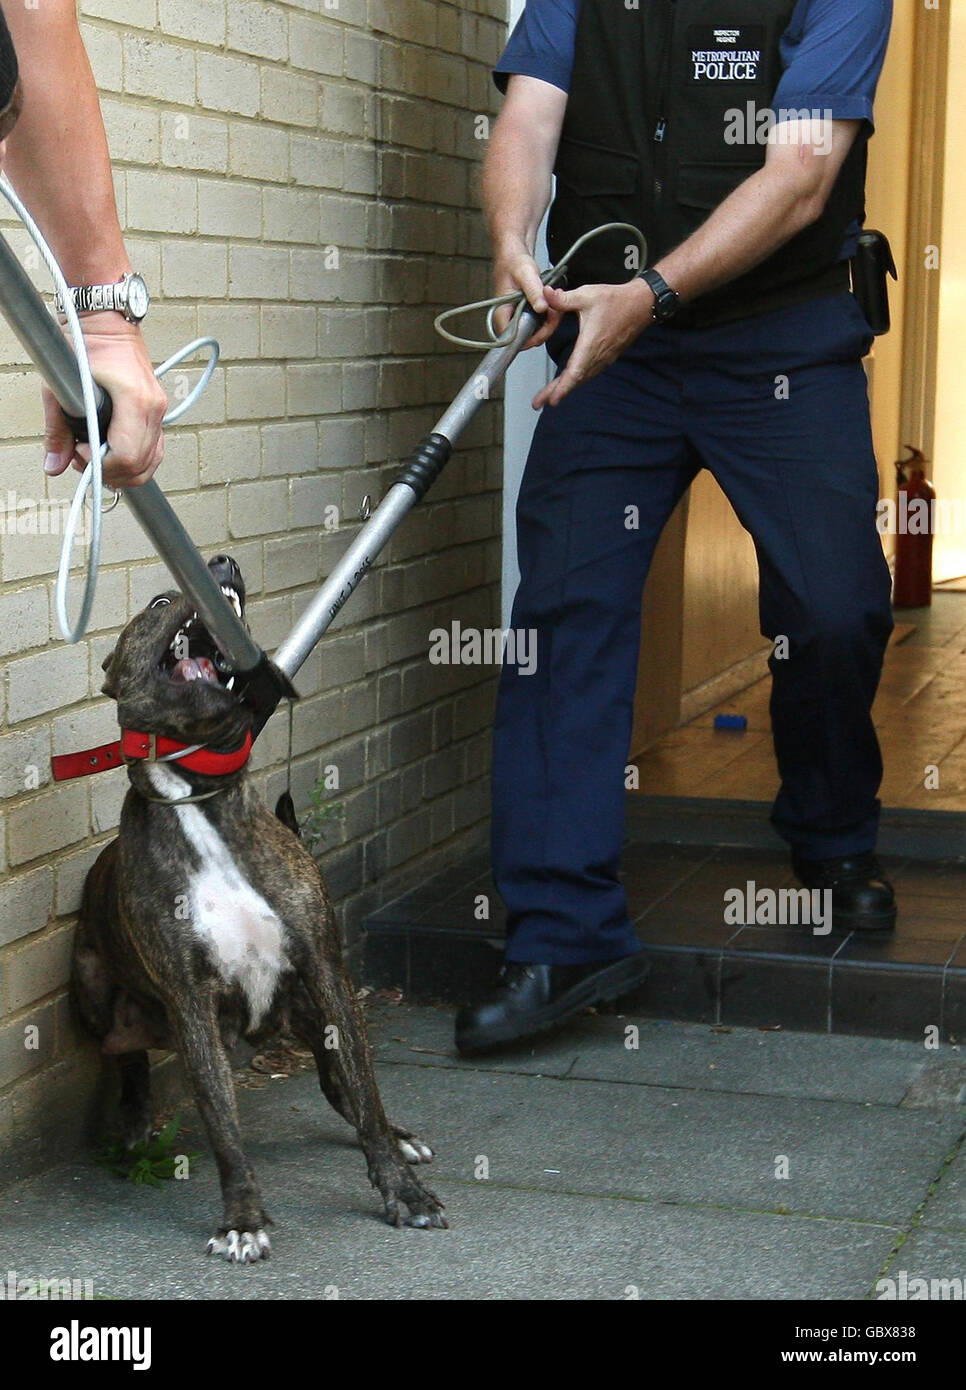 Metropolitan Police dog handlers remove a pitbull during a raid on an address in Kennington, south London, as part of operation Navara, targeting dangerous dogs. Stock Photo